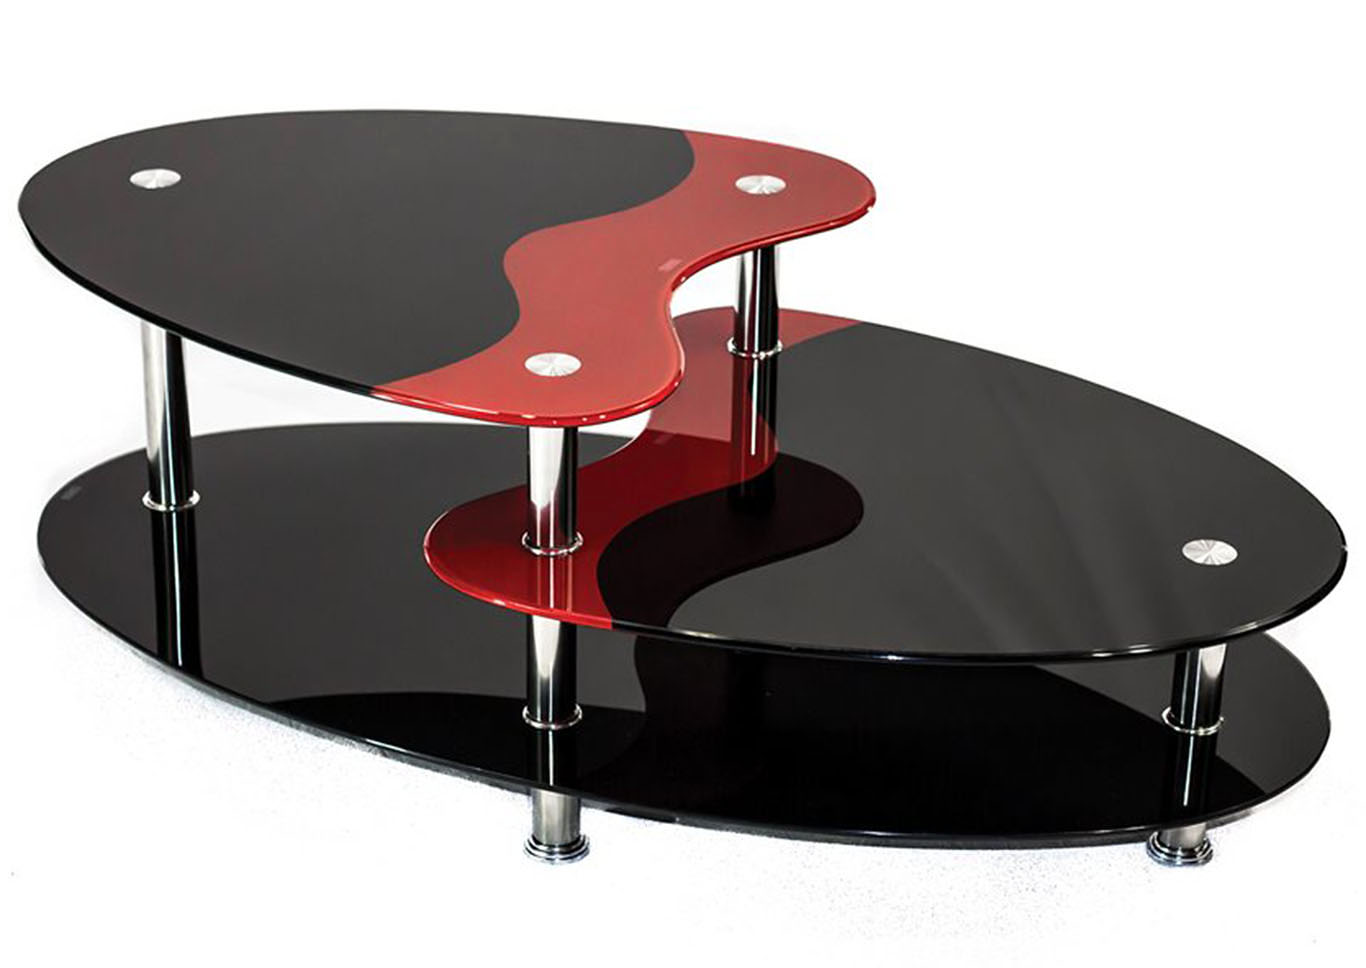 Black & Red 3 Tier Glass Coffee Table,Home Source